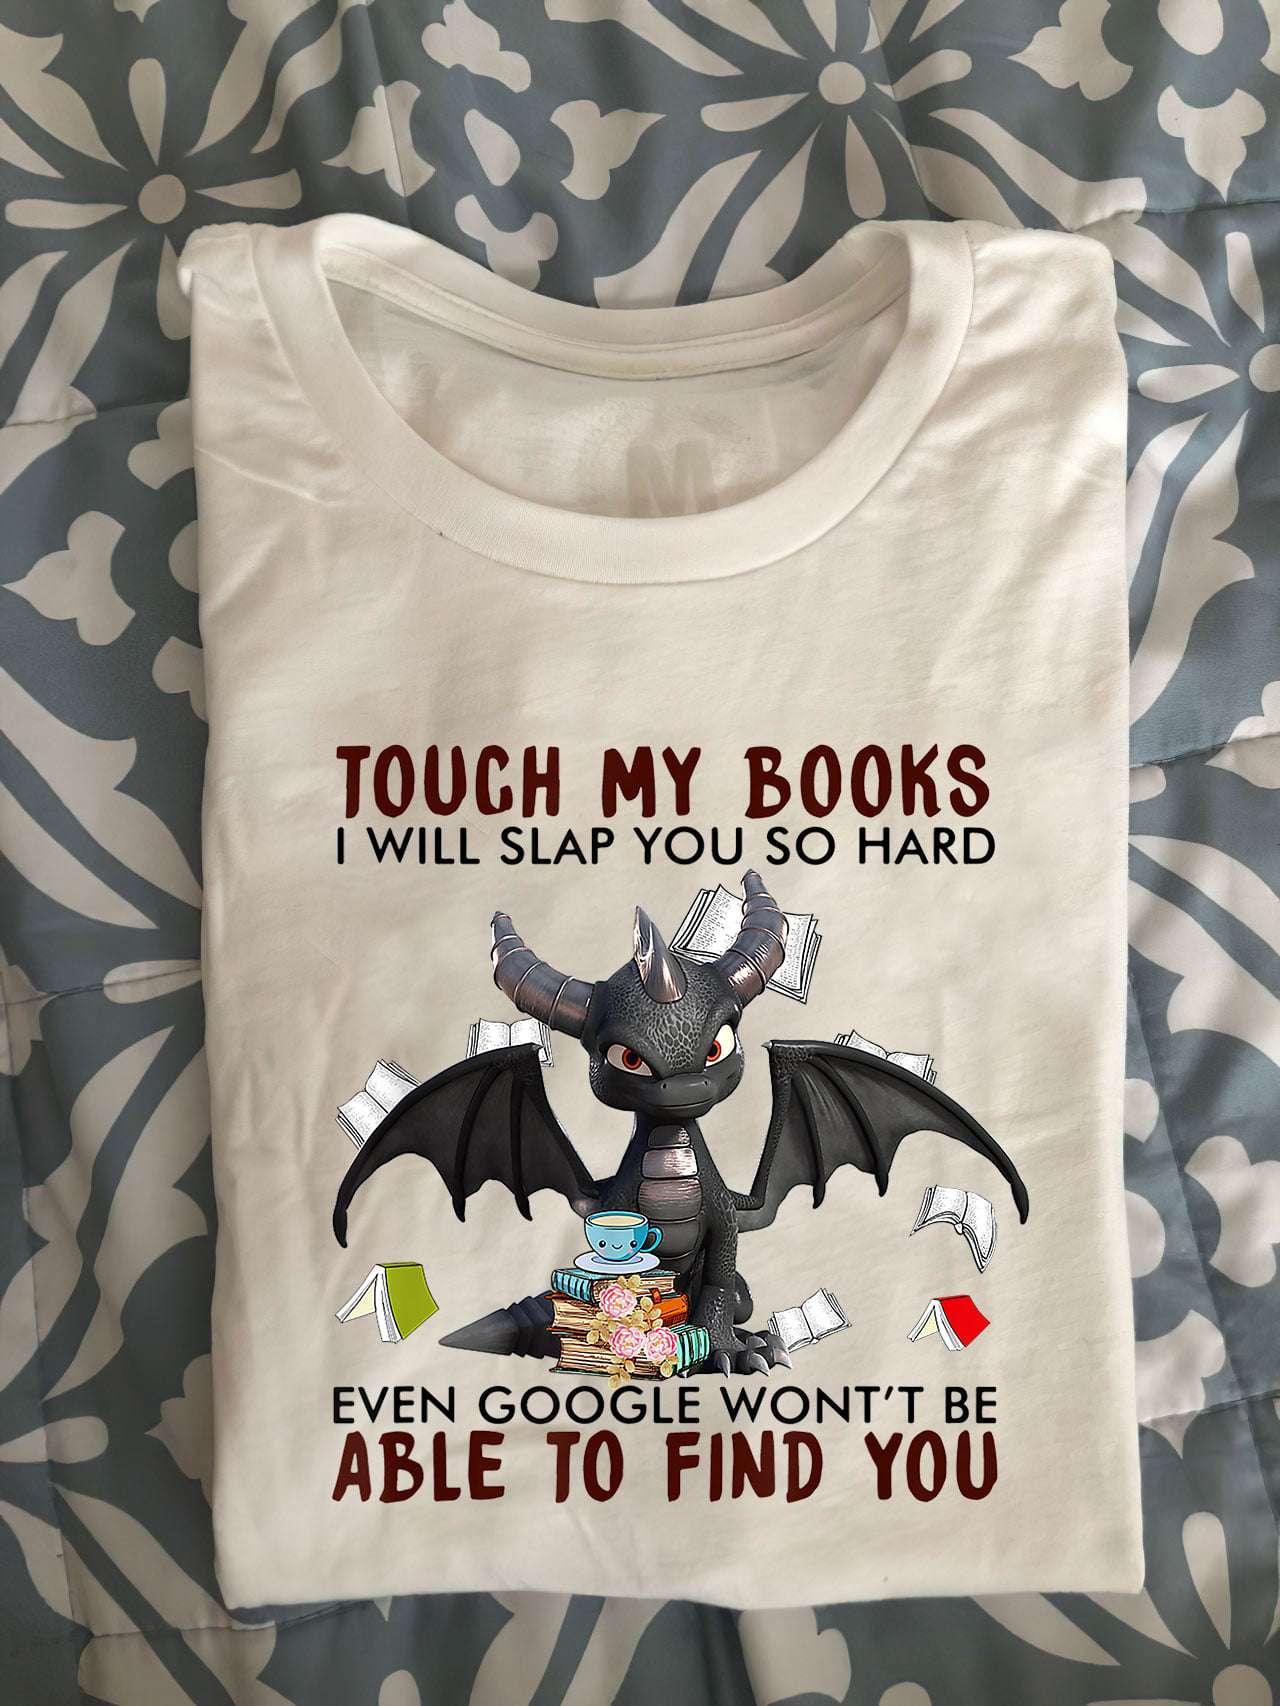 Touch my books I will slap you so hard even google won't be able to find you - Dragon and books, crazy book dragon